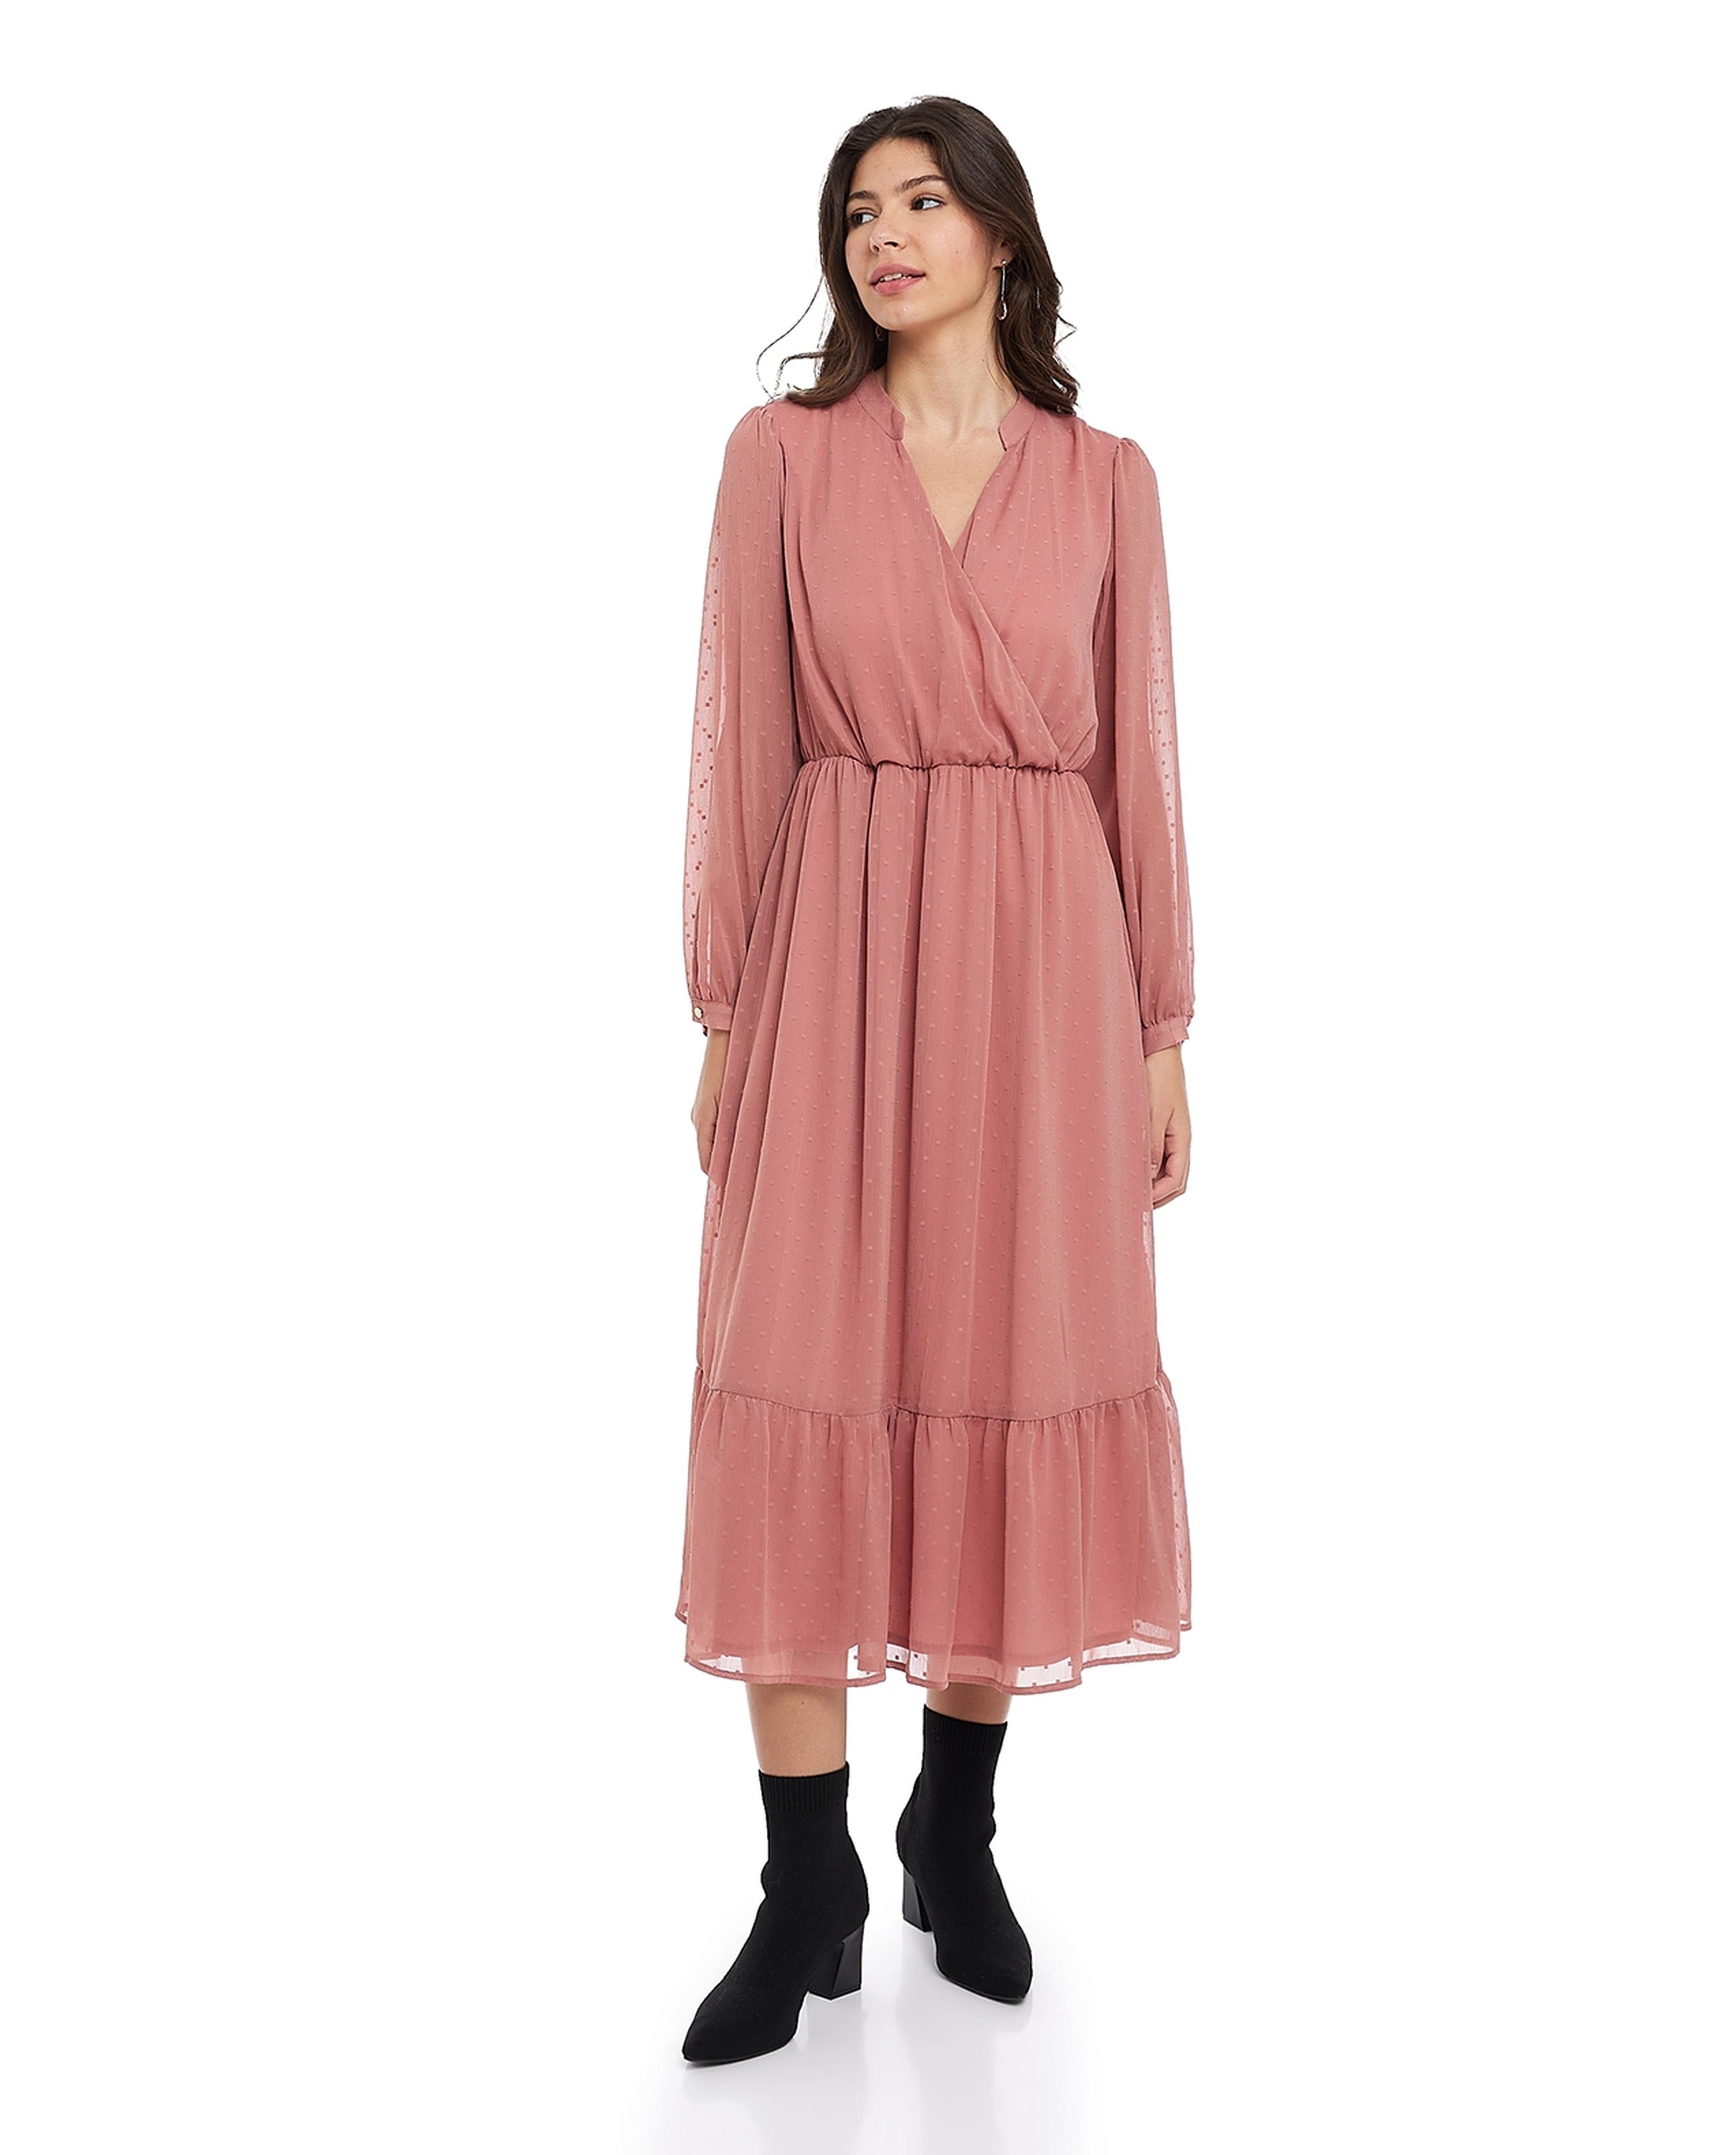 Woven Midi Dress with Surplice Neck and Bishop Sleeves